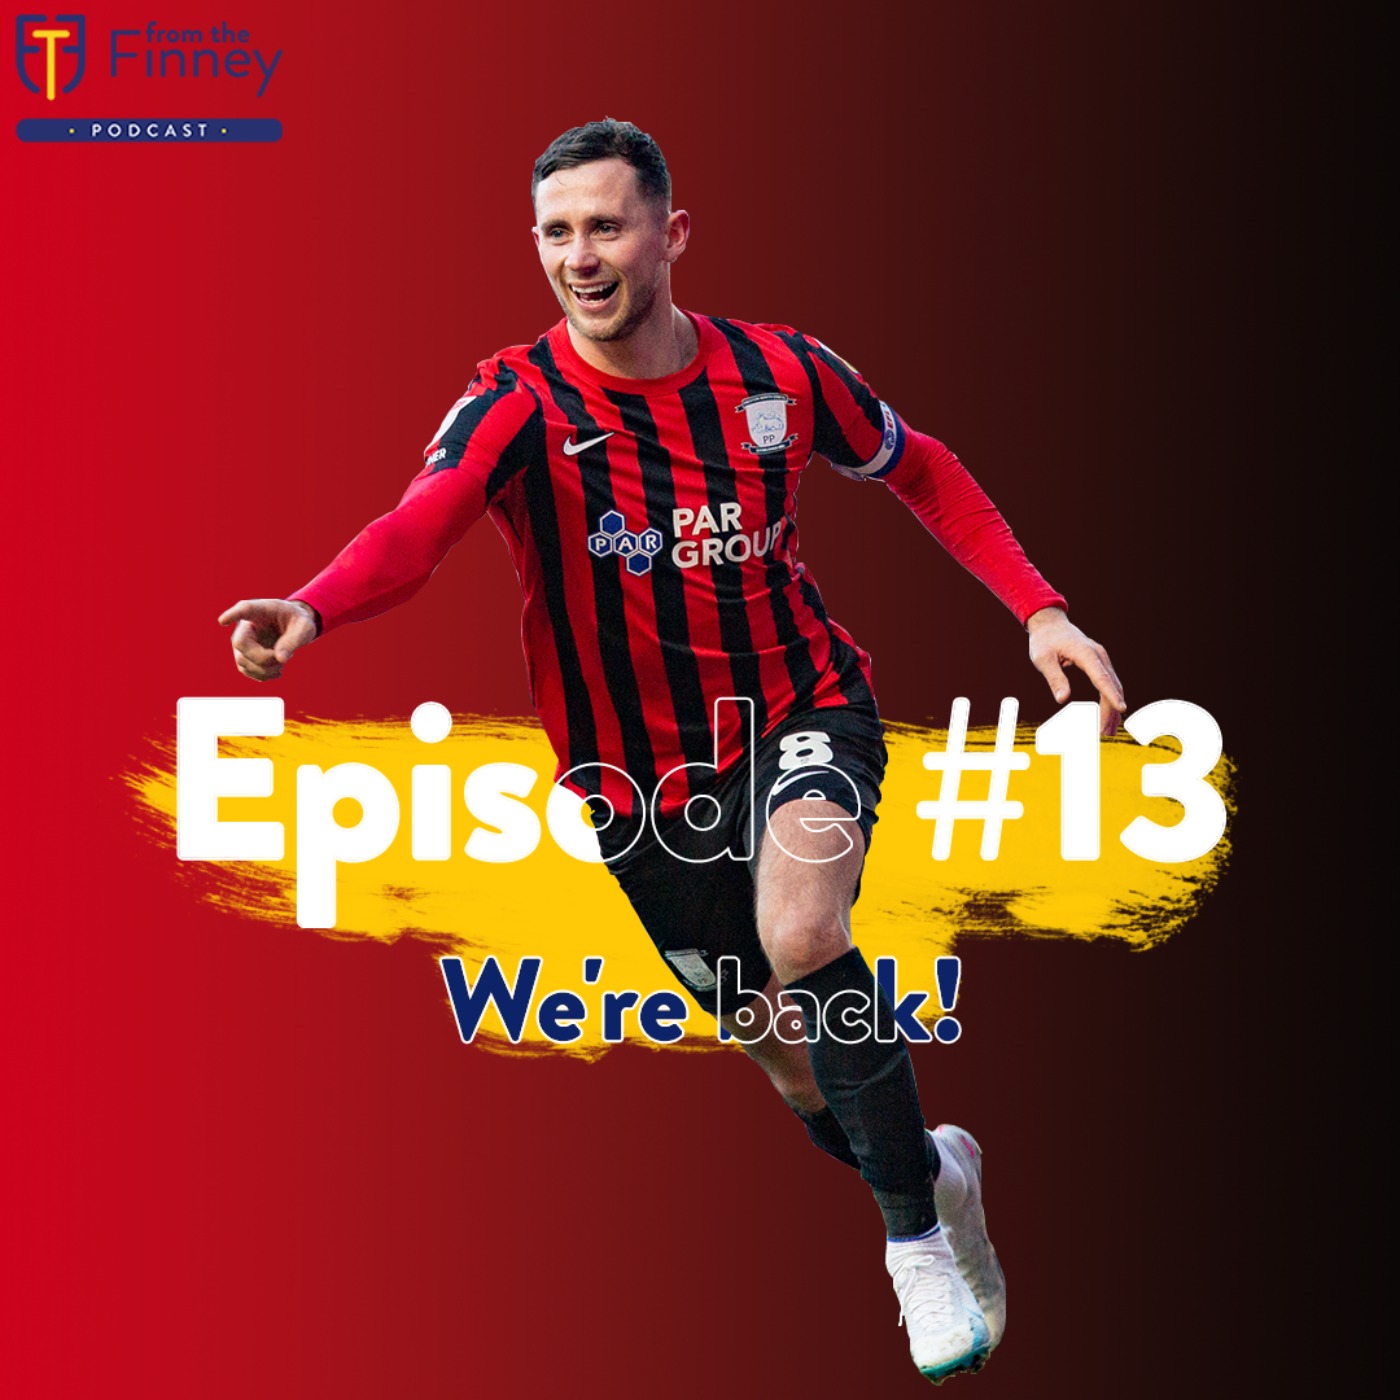 Episode #13 // We're back! // From the Finney Podcast